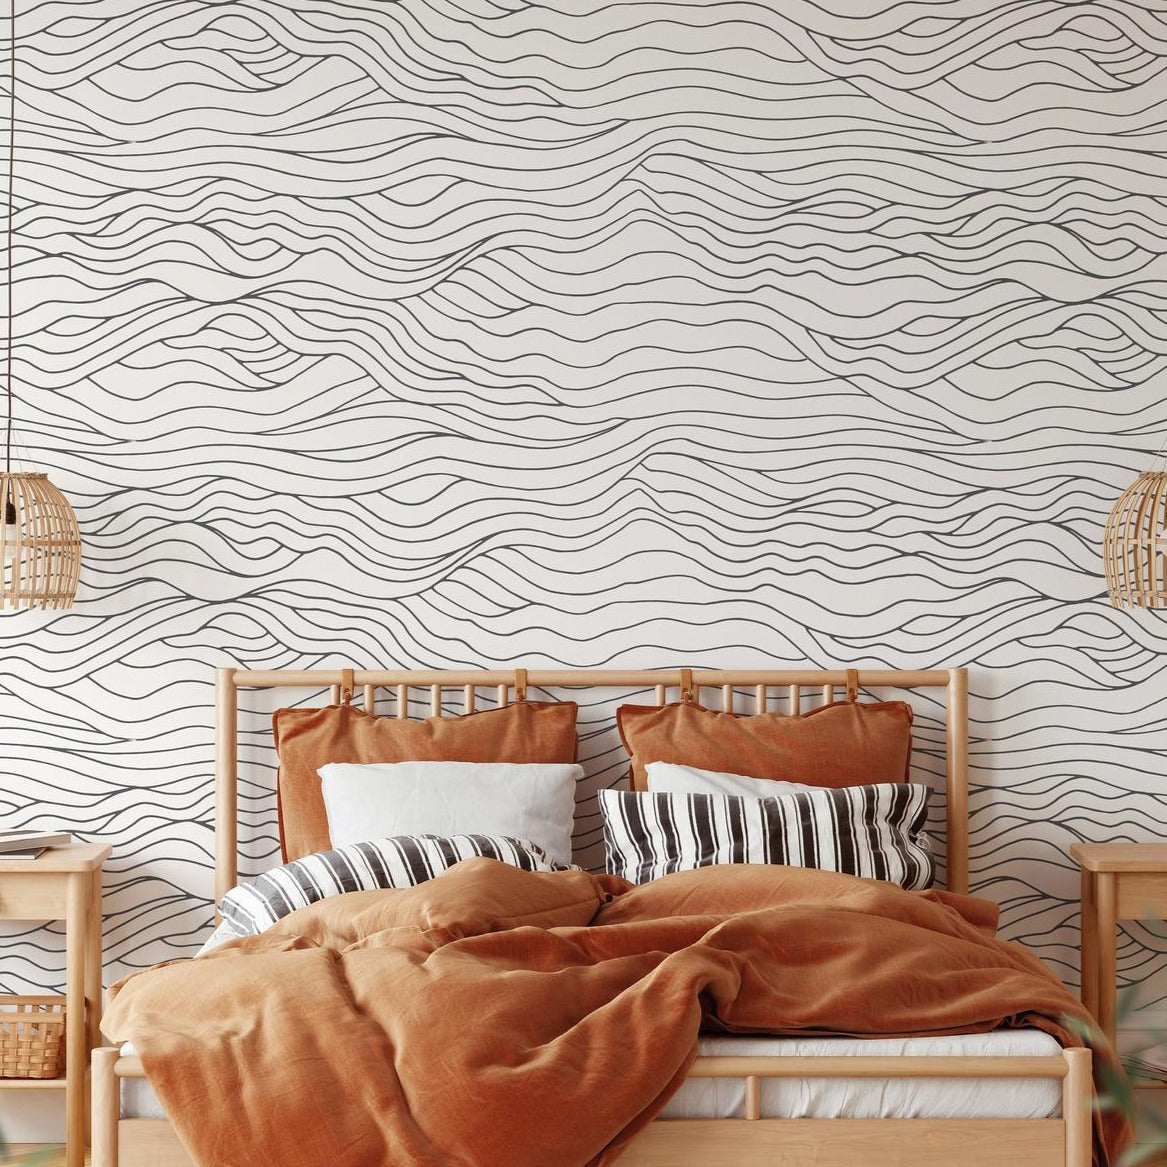 A stylish bedroom with a wooden bed frame and rust-colored bedding. The background features Modern Line Abstract Wave Wallpaper, with fluid, black wavy lines on a white background, creating a serene and contemporary ambiance.